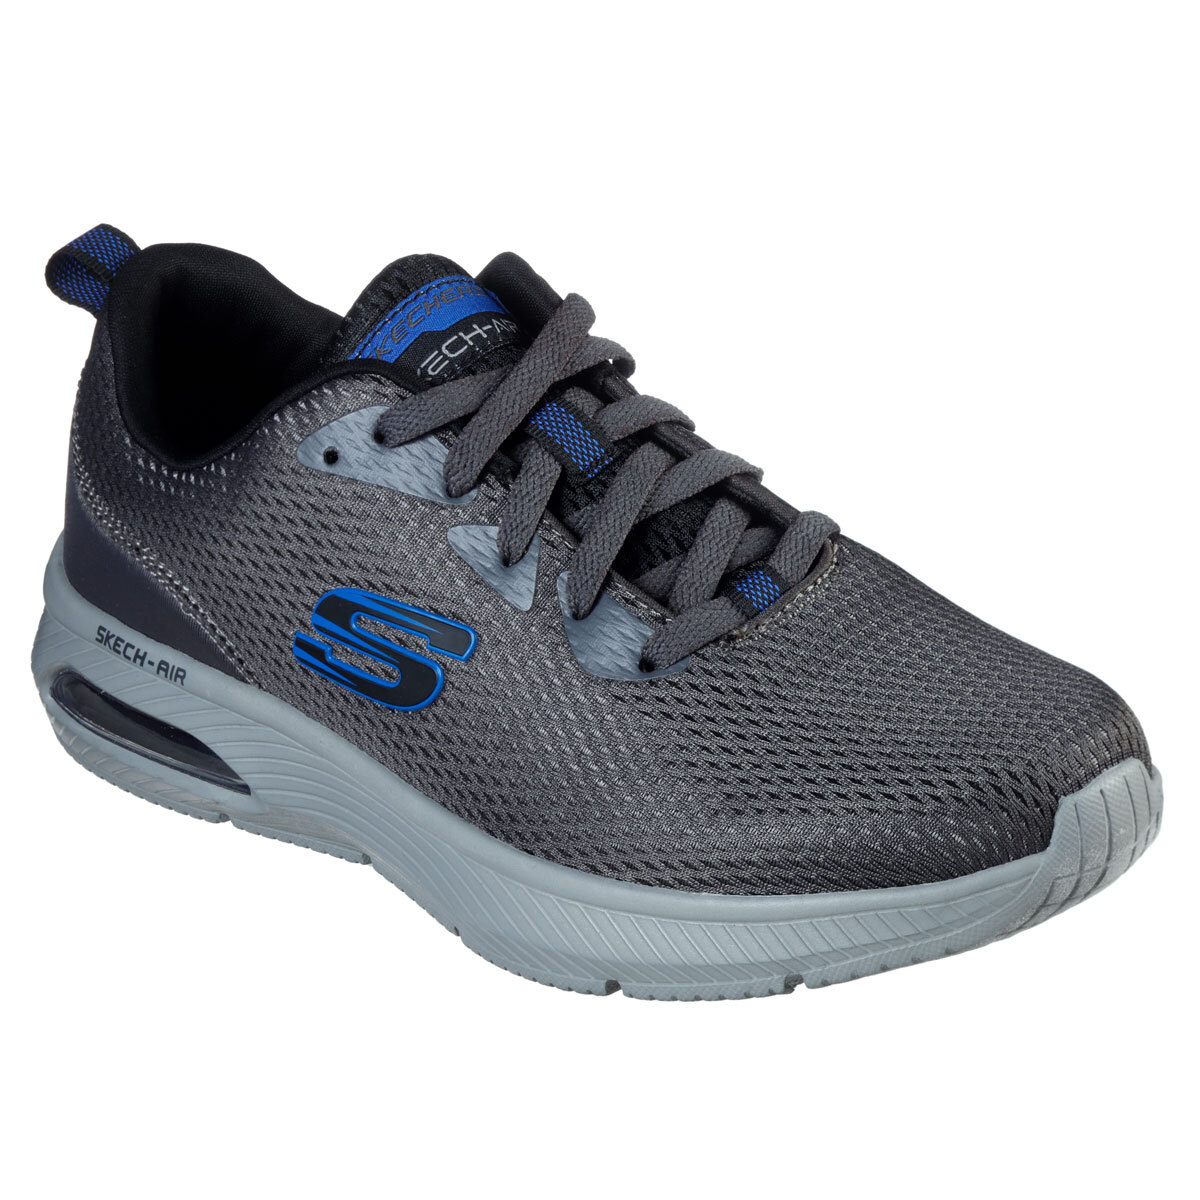 skechers dyna air running shoes